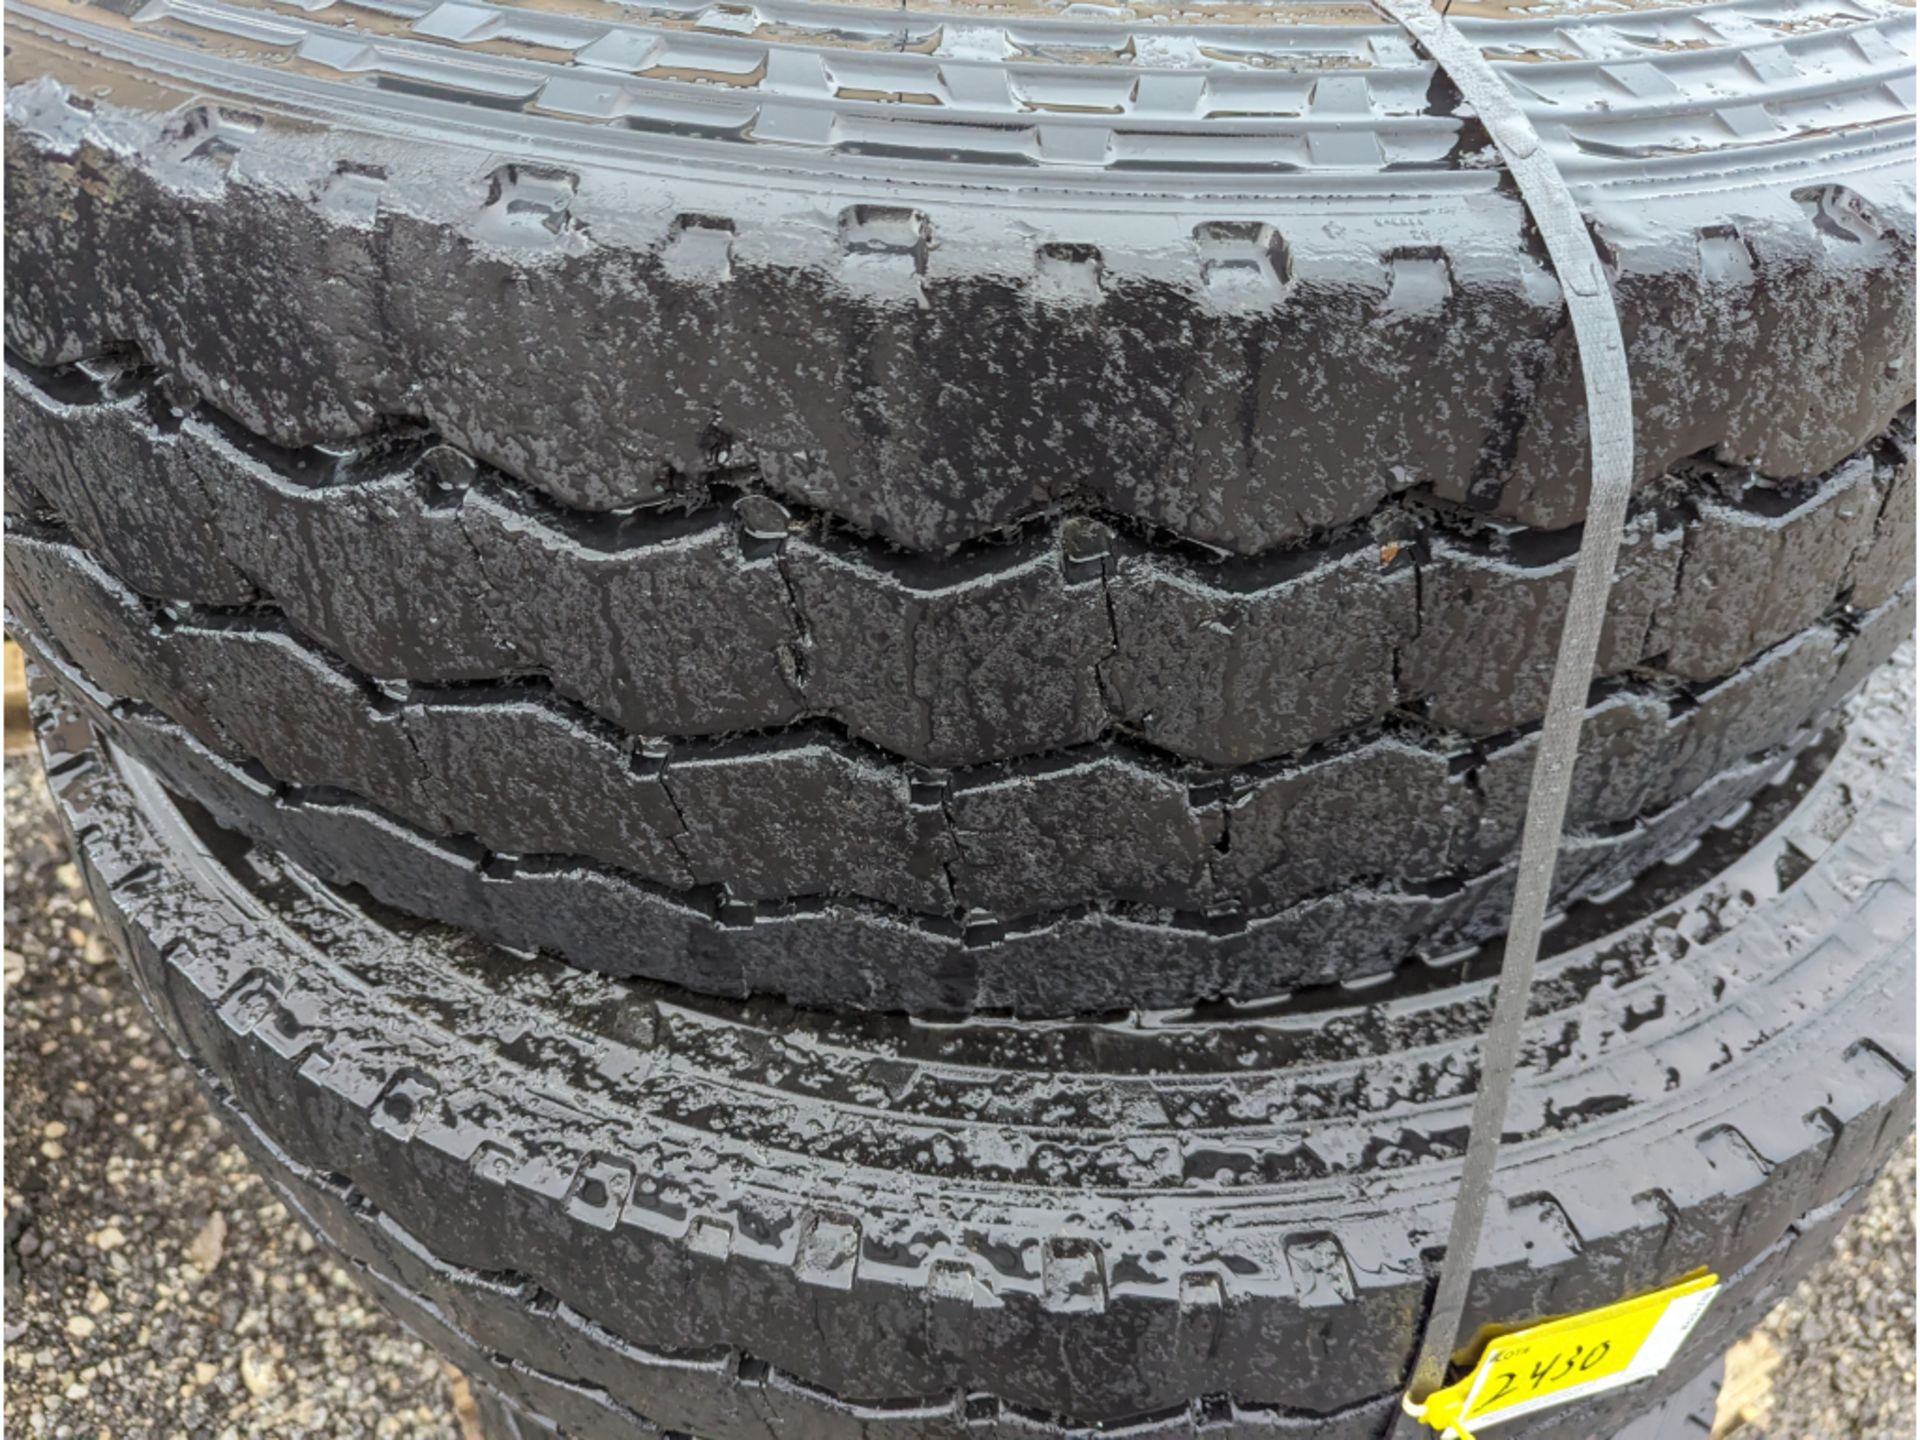 4 Michelin XZUS 2 315/80R22.5 commercial truck tires USED Virgin Tread Surplus Take Off - Image 3 of 5